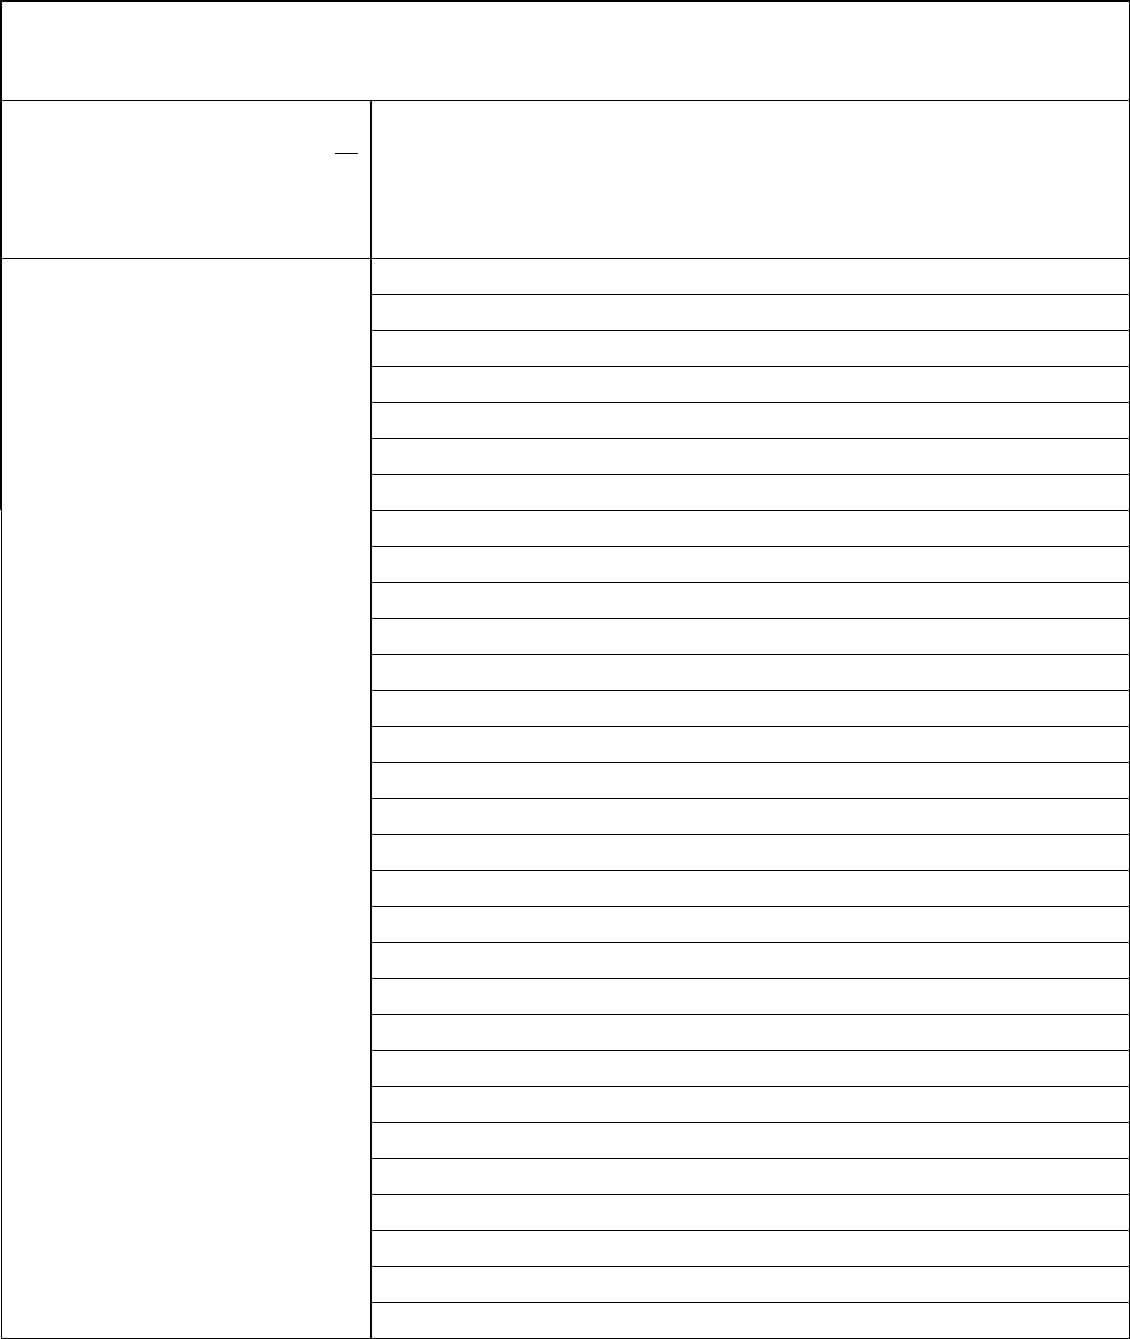 Cornell Notes Template In Word And Pdf Formats Inside Cornell Note Template Word